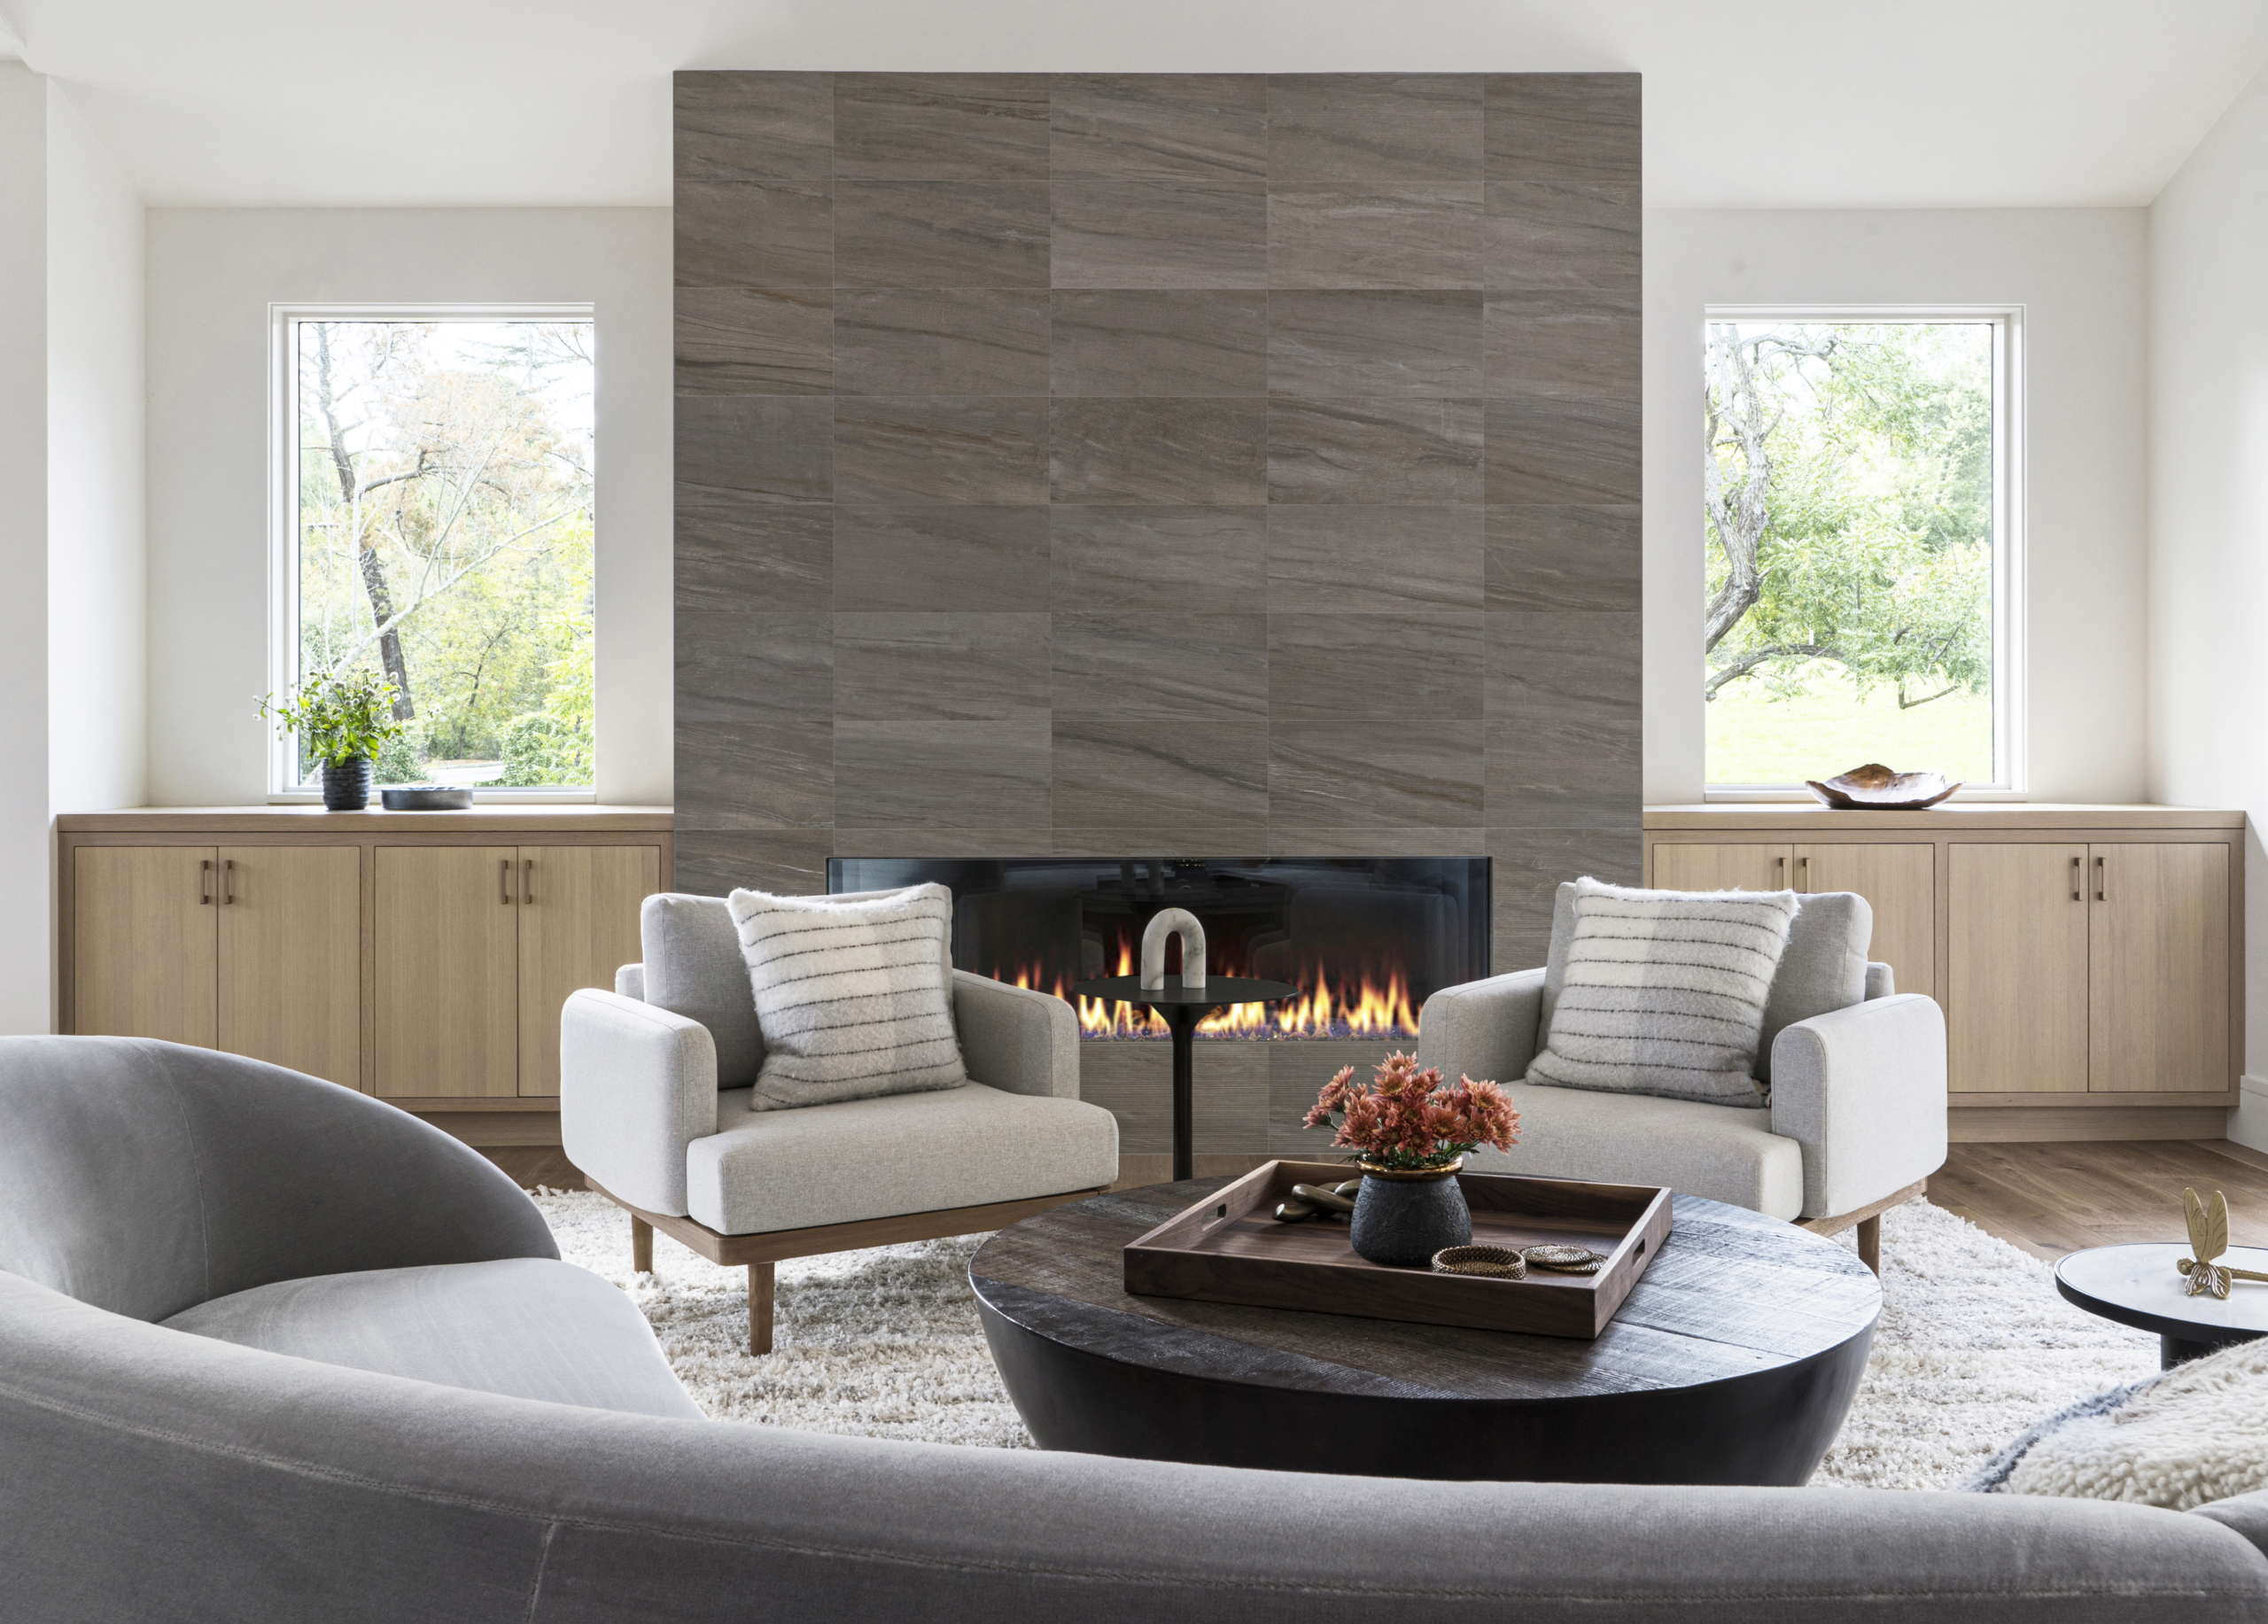 Living area with fireplace and neutral seating